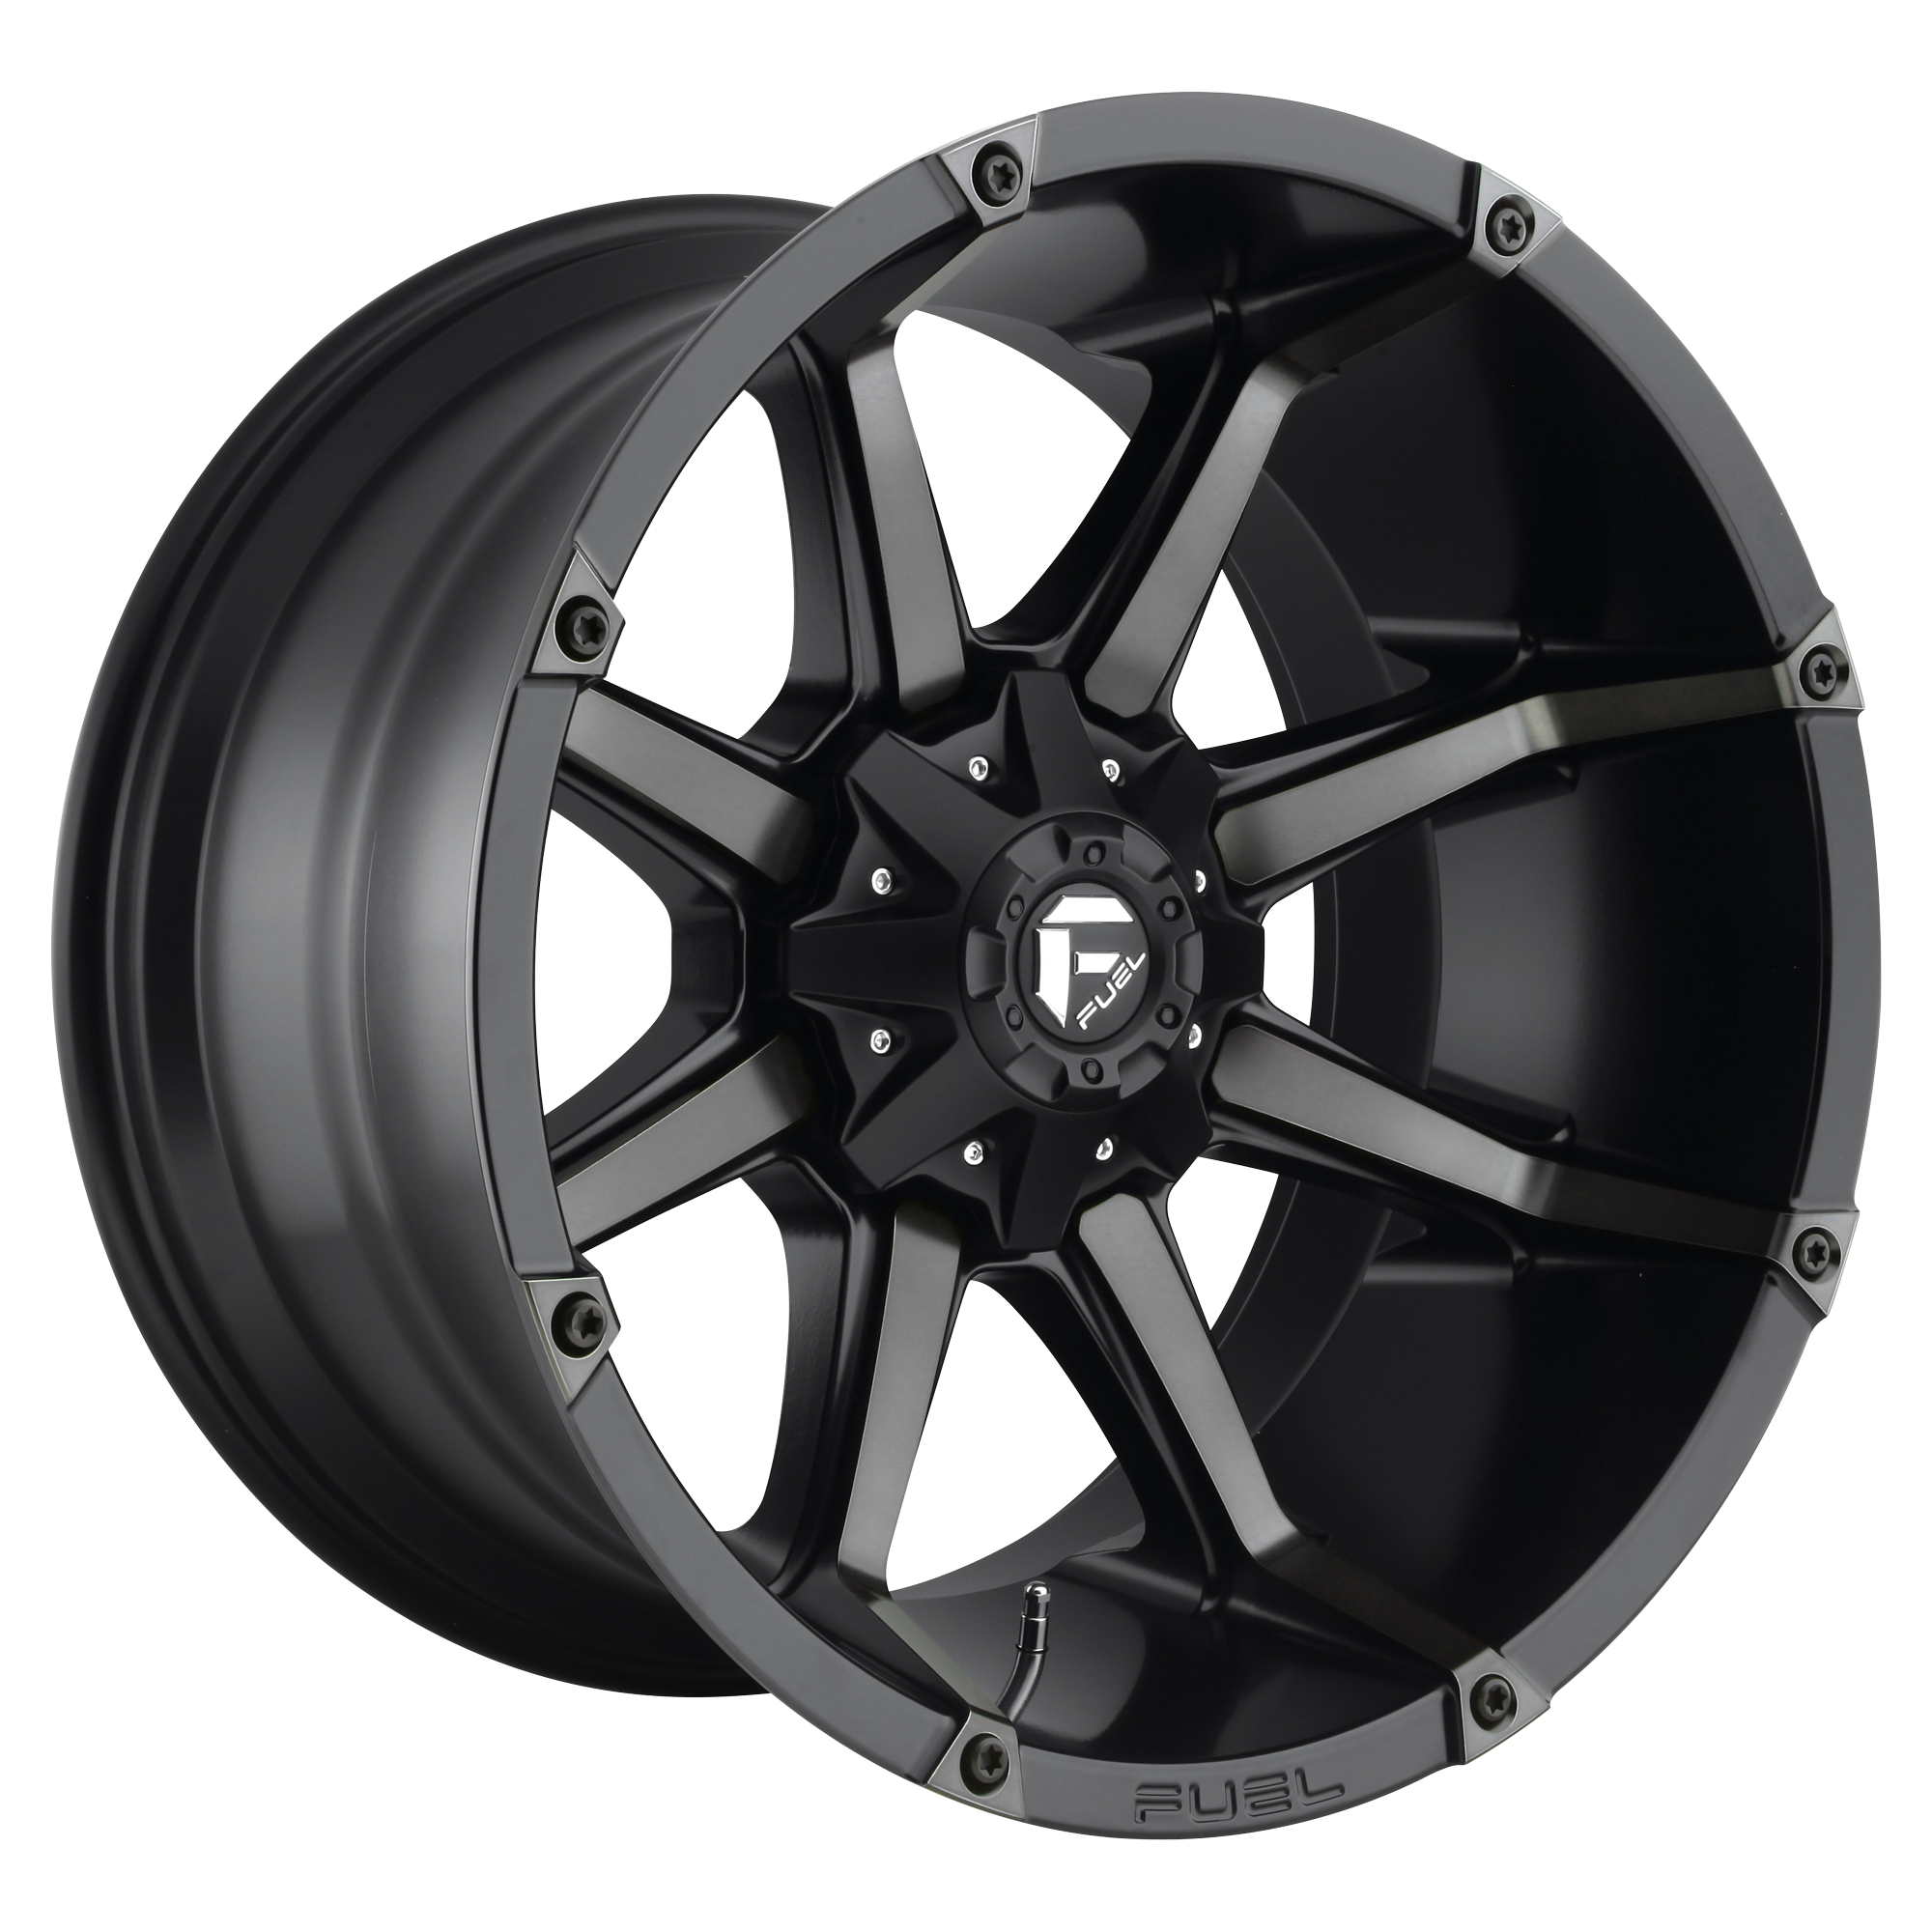 COUPLER 20x9 5x139.70/5x150.00 MATTE BLACK DOUBLE DARK TINT (1 mm) - Tires and Engine Performance